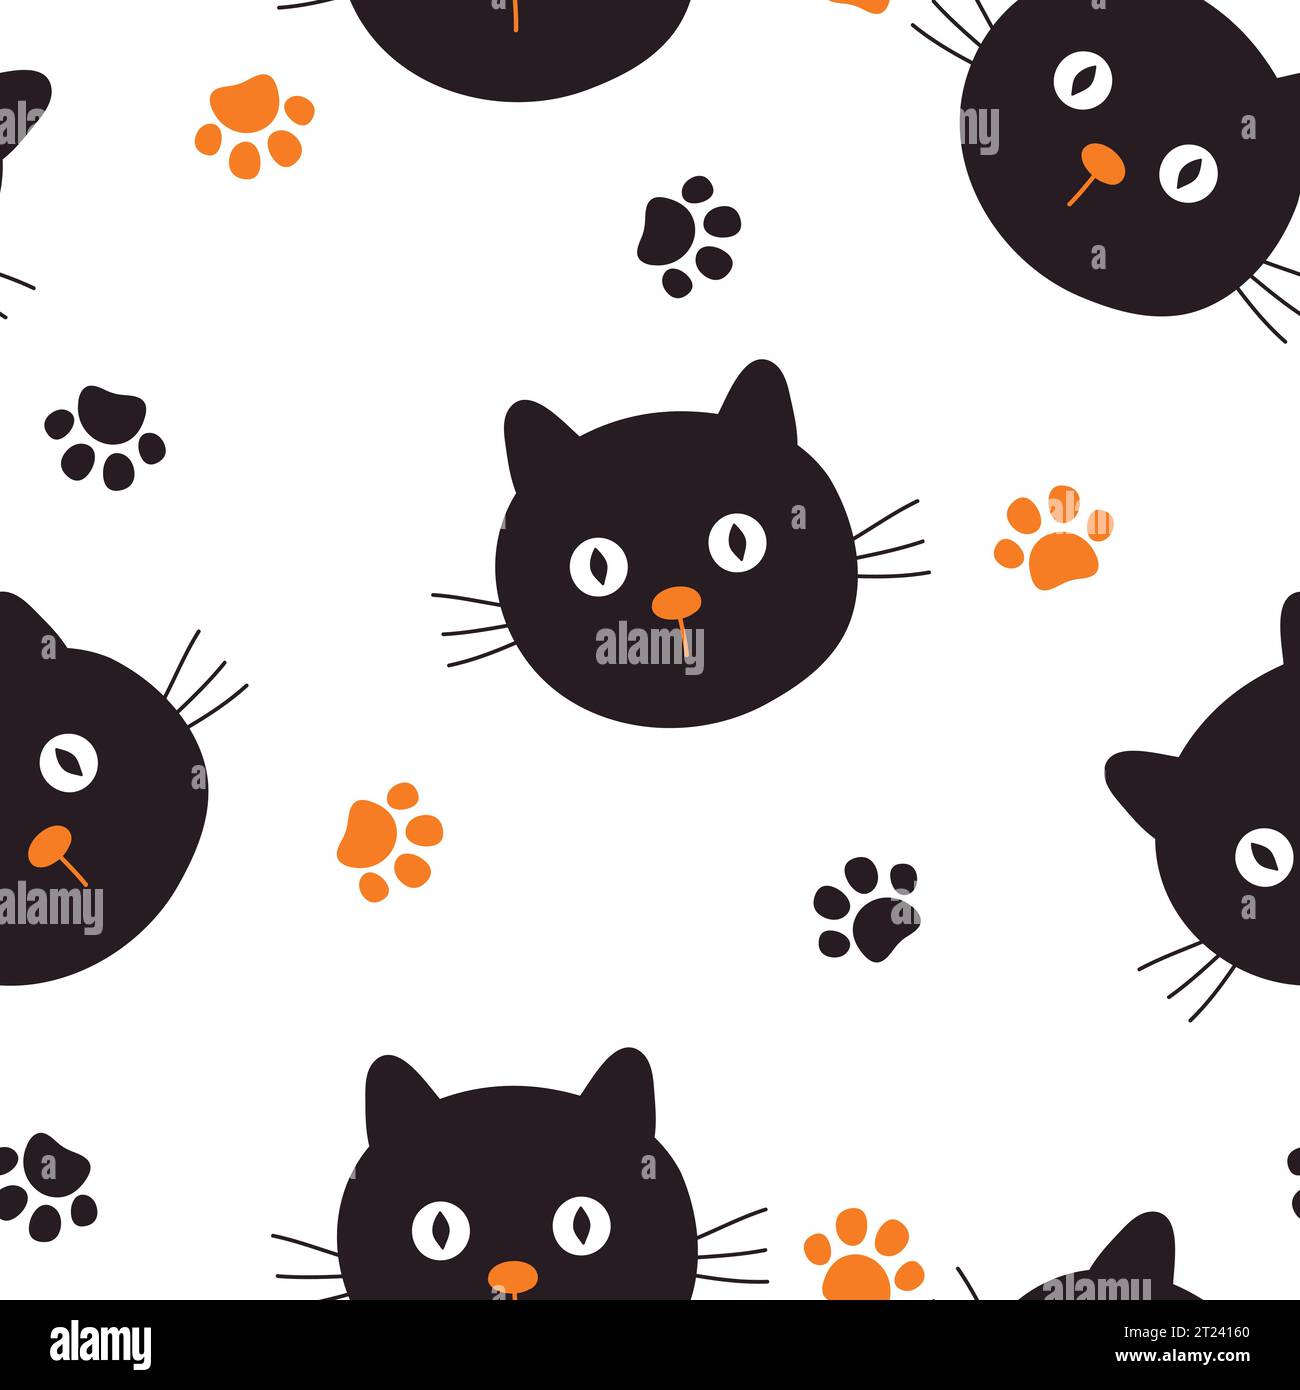 Seamless pattern with cute black cat and paw footprint. Vector illustration on white background. Stock Vector